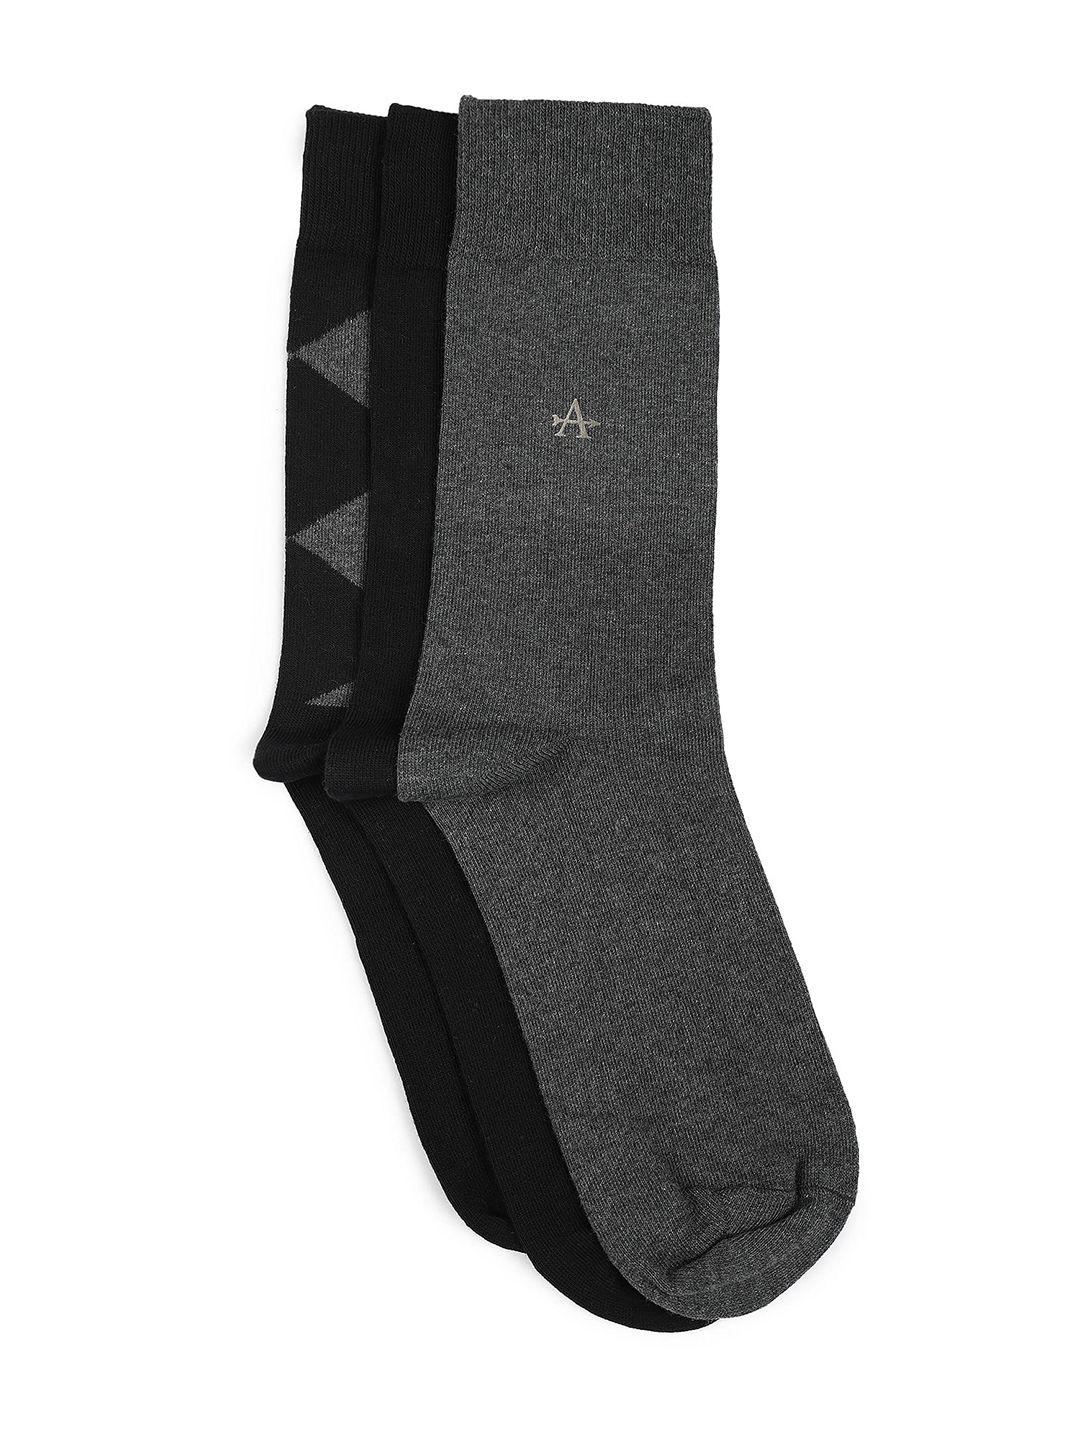 arrow men pack of 3 patterned cotton breathable above ankle length socks